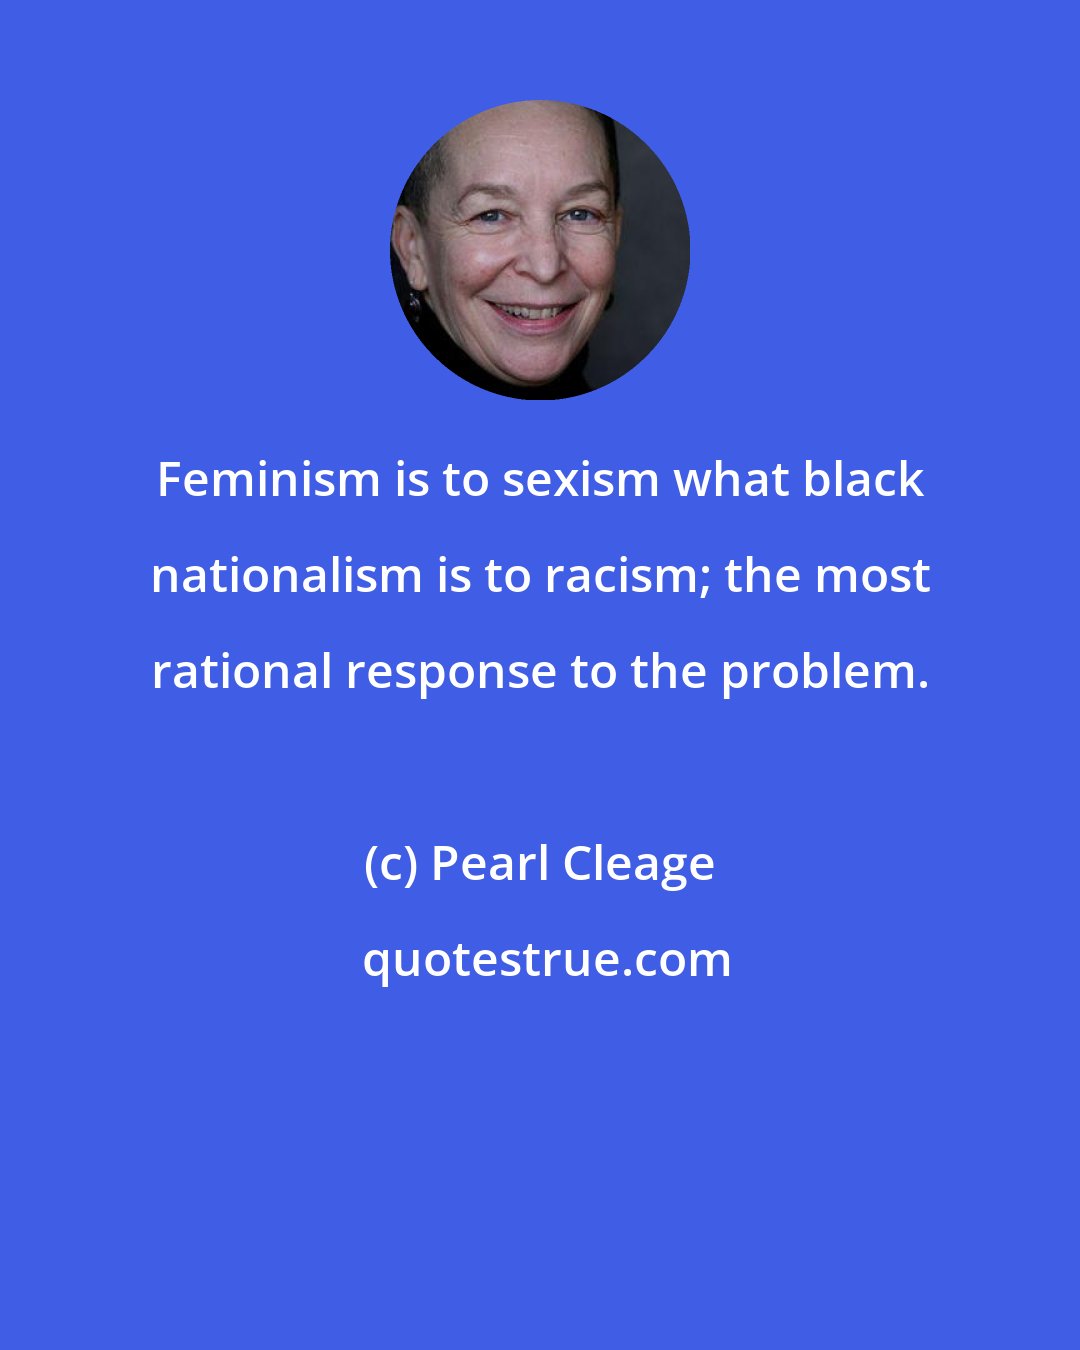 Pearl Cleage: Feminism is to sexism what black nationalism is to racism; the most rational response to the problem.